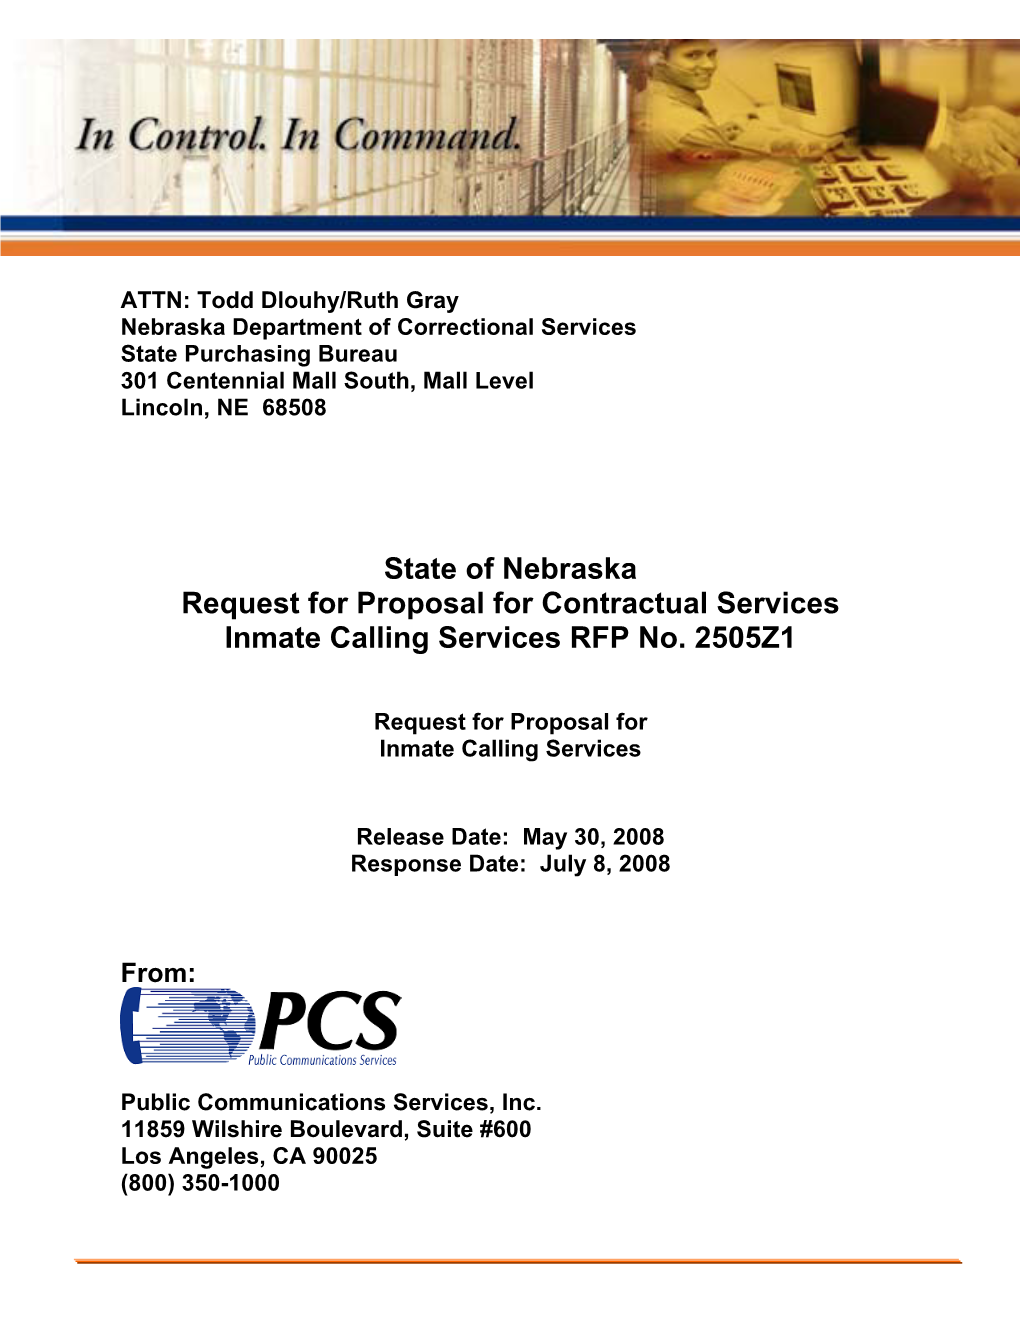 State of Nebraska Request for Proposal for Contractual Services Inmate Calling Services RFP No